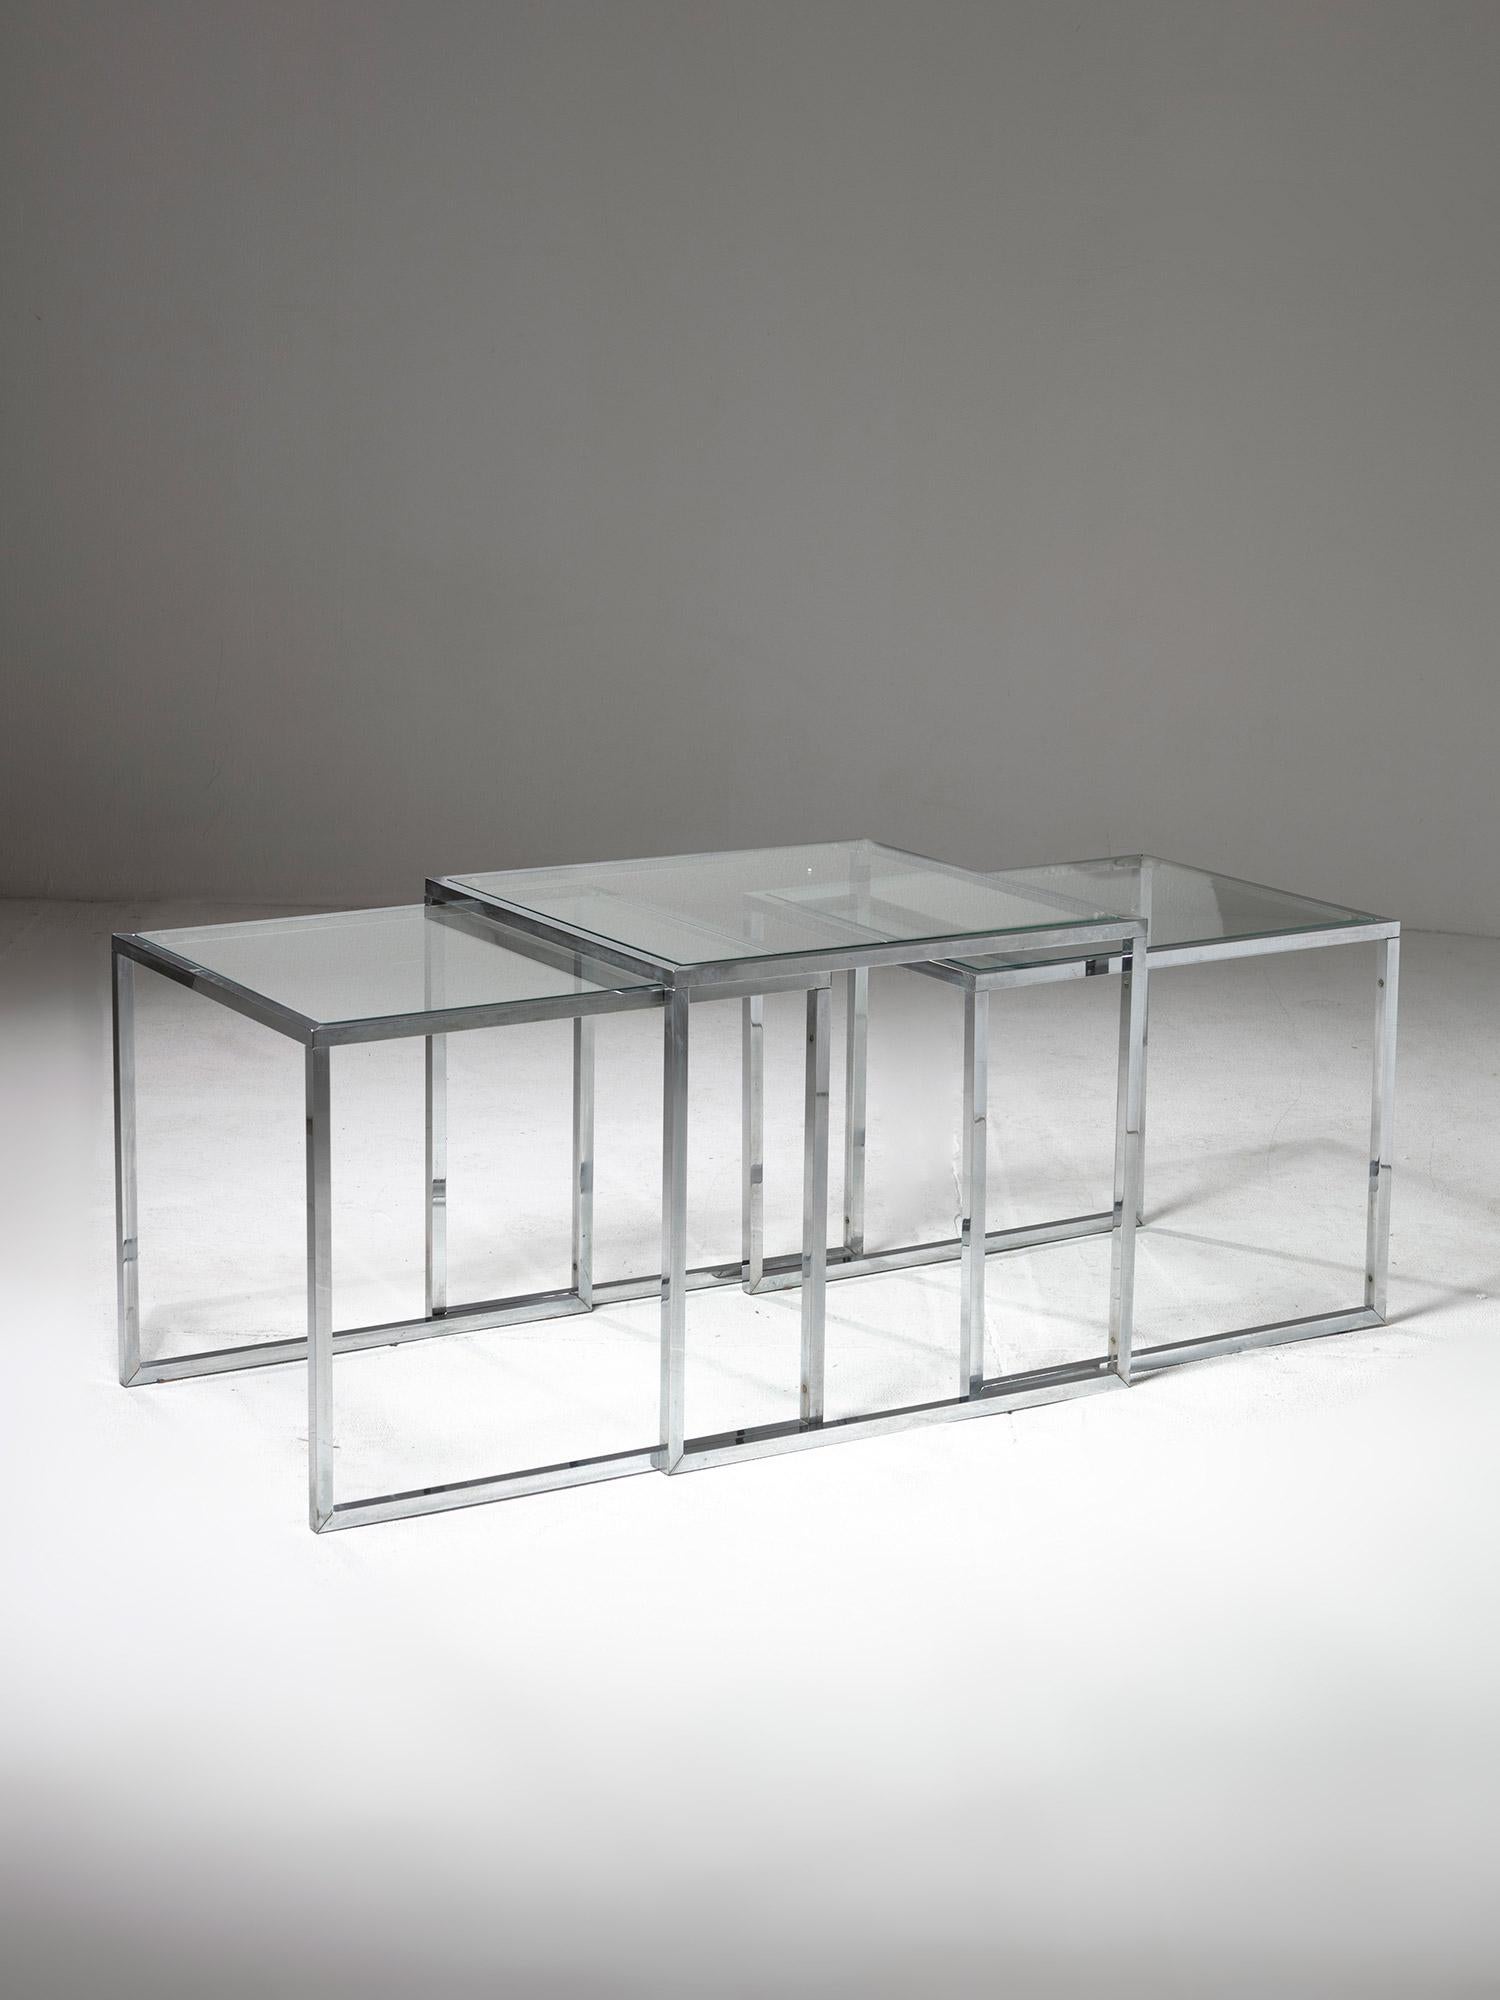 Set of three nesting / stacking side tables.
Squared steel frame and glass top, these versatile pieces can expand on both horizontal and vertical dimension, or also used separately.
Size refers to the largest piece.